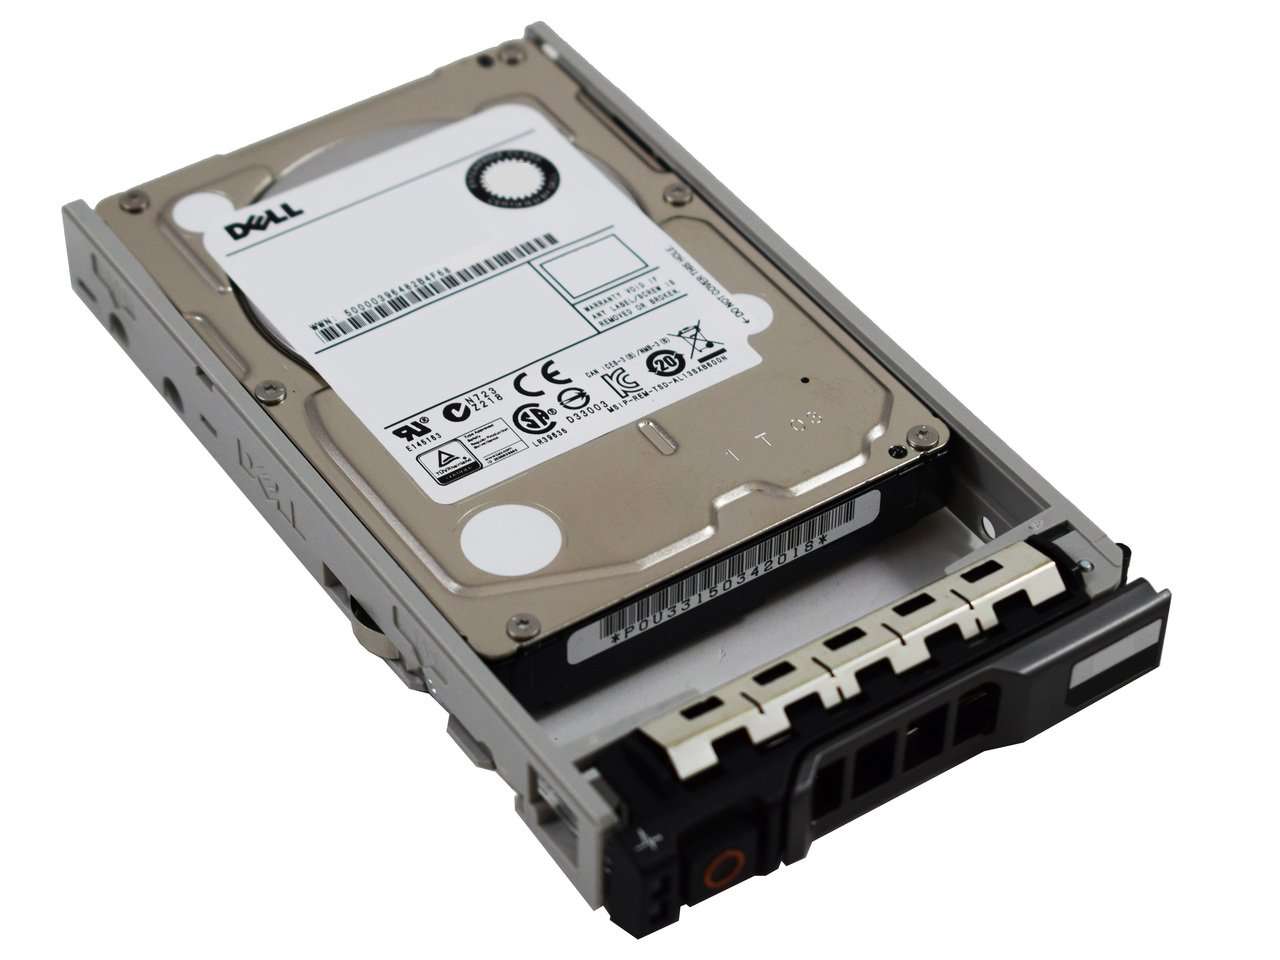 Dell G13 400-AESD 600GB 15K RPM SAS 6Gb/s 512n 2.5" Manufacturer Recertified HDD